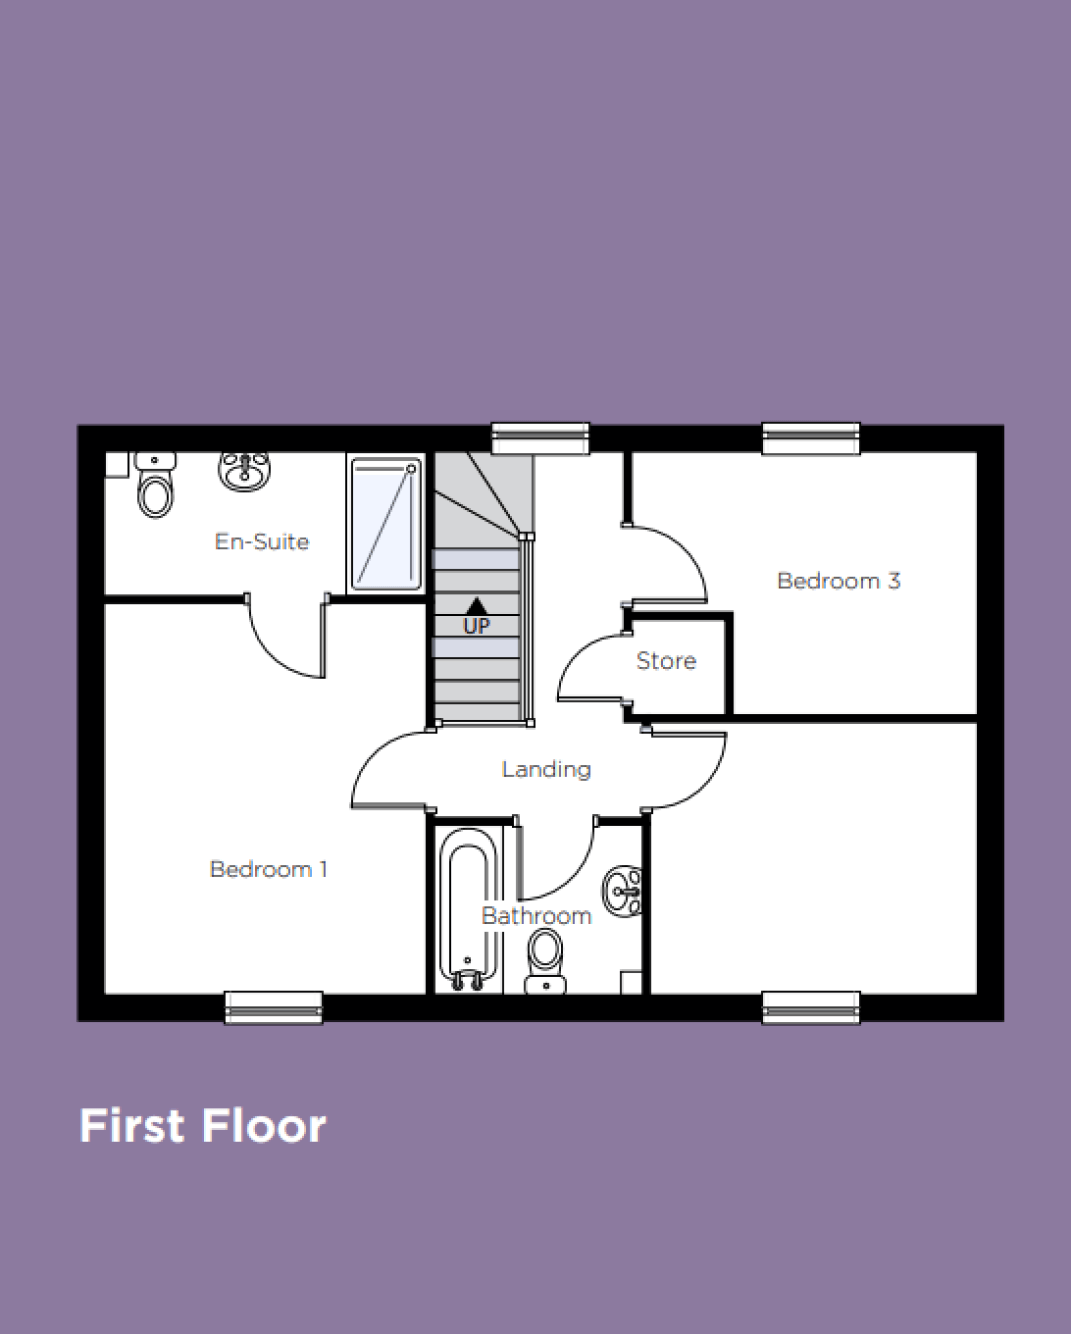 The Asfordby First Floor Plan